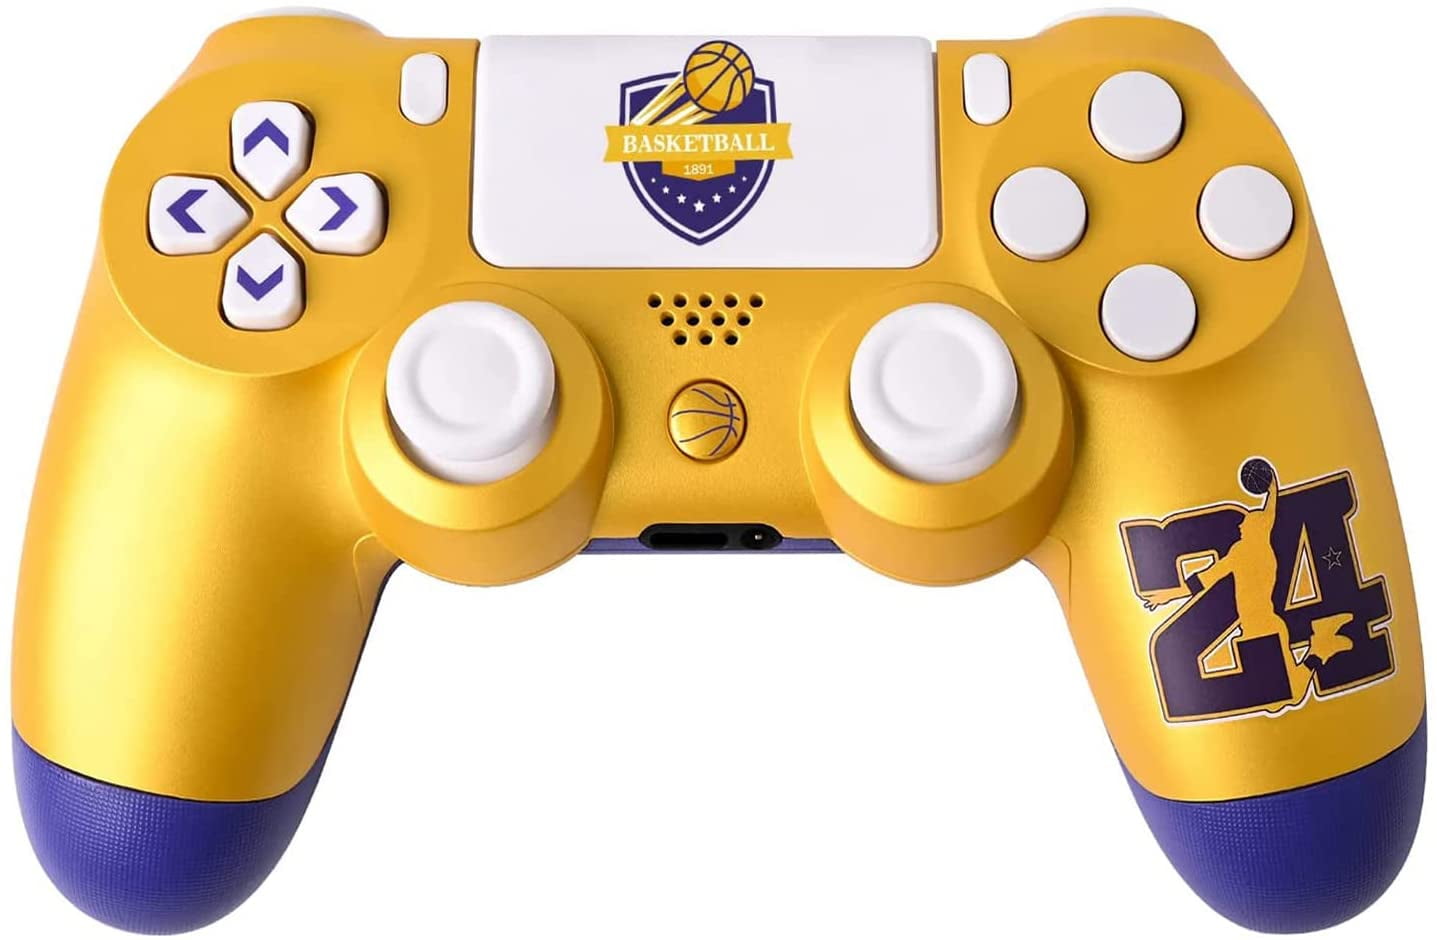 Wireless Controller Compatible with P4 Gaming Gamepad with Charging Cable, Dual Vibration Remote Game Joystick for PS4 (Gold Basketball) - Walmart.com